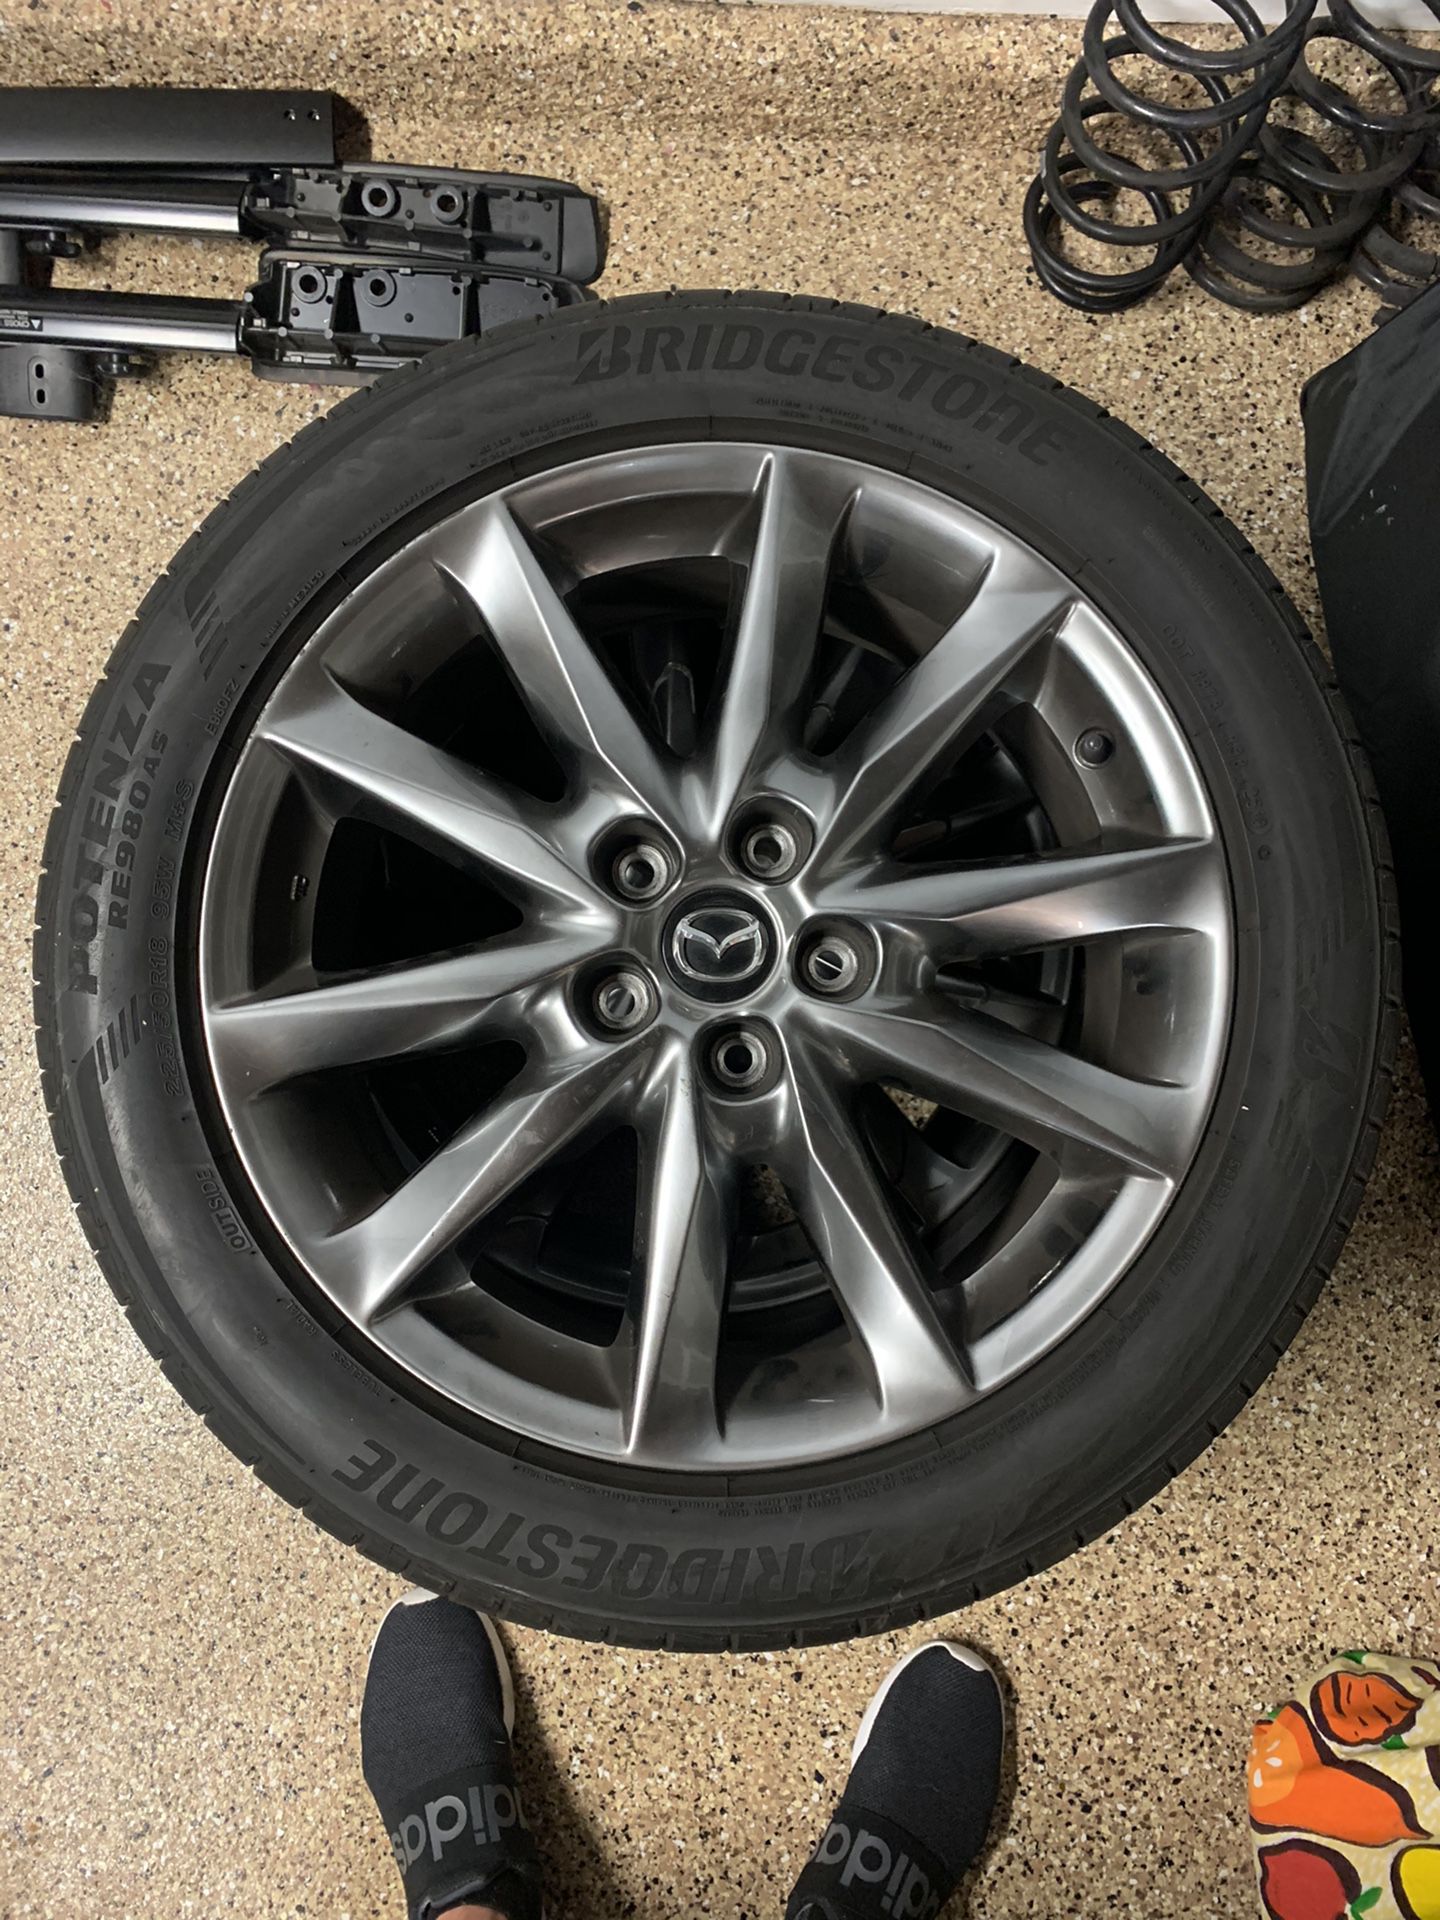 2018 Mazda 3 Touring Wheels and Tires